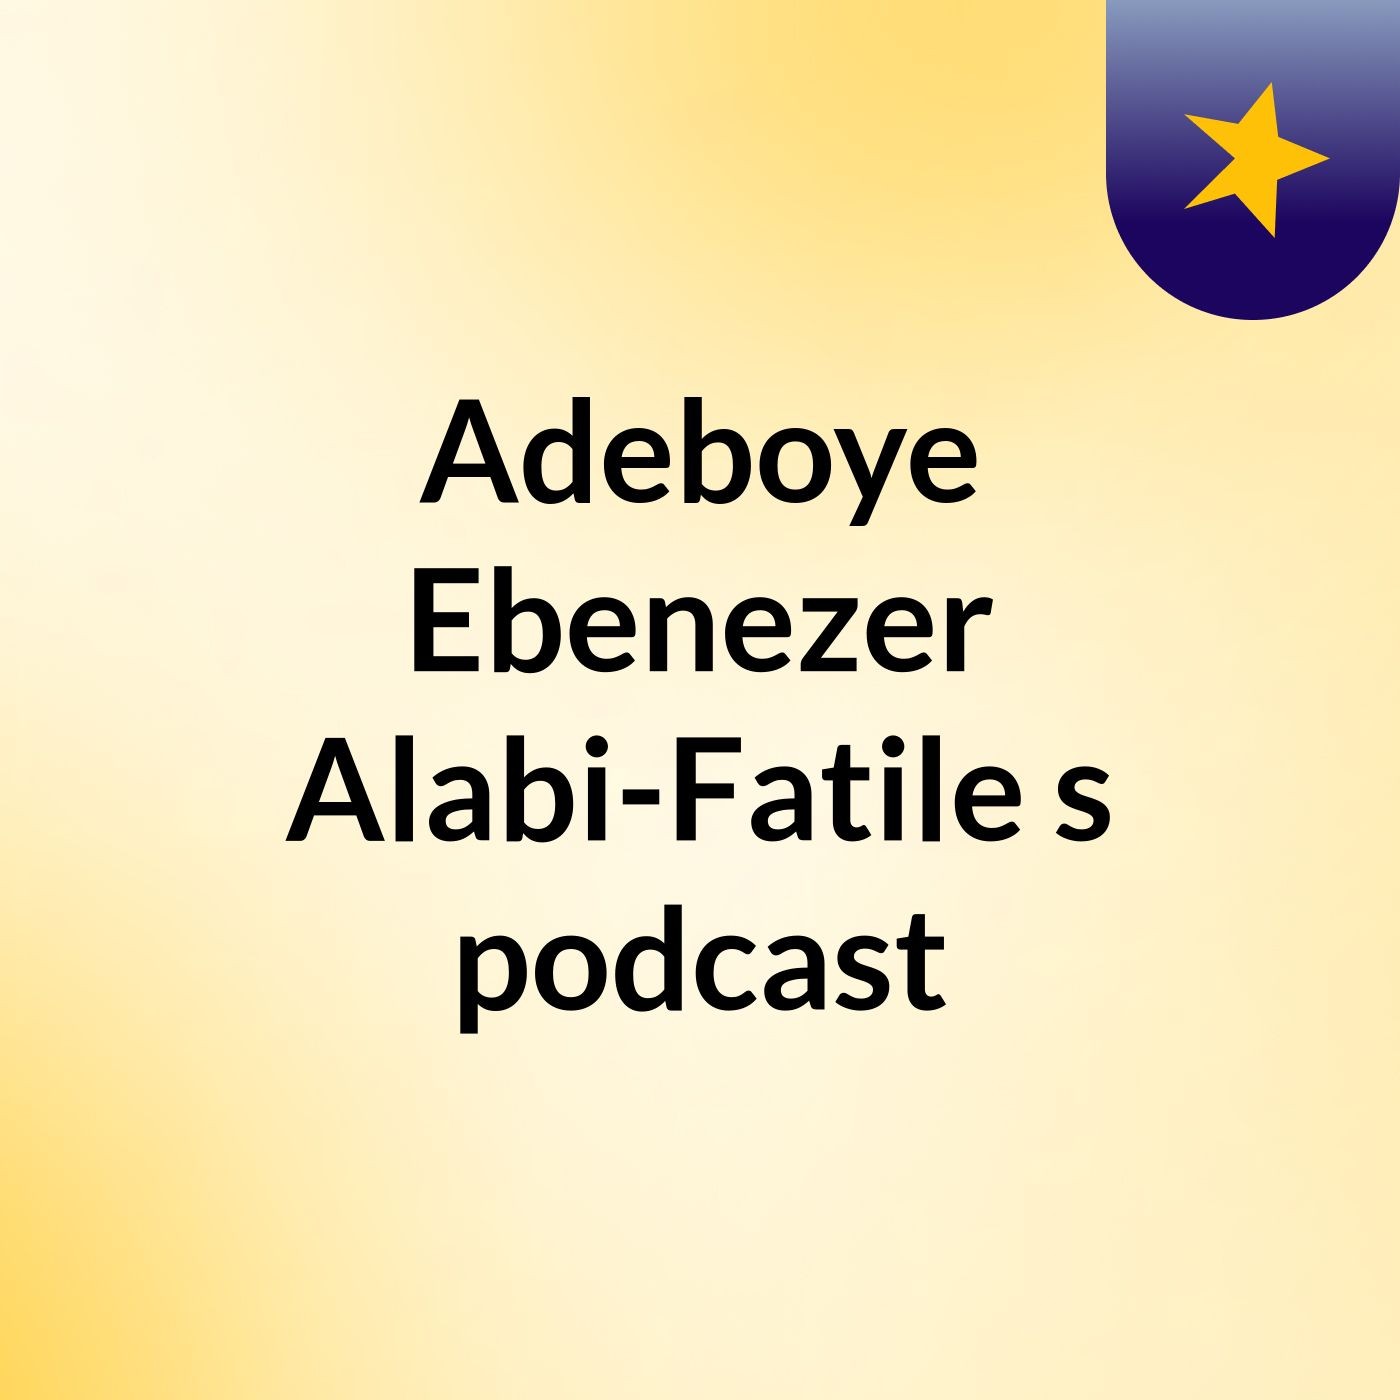 Episode 2 - Take Charge, Build Capacity And Become Relevant by Adeboye Ebenezer Alabi-Fatile